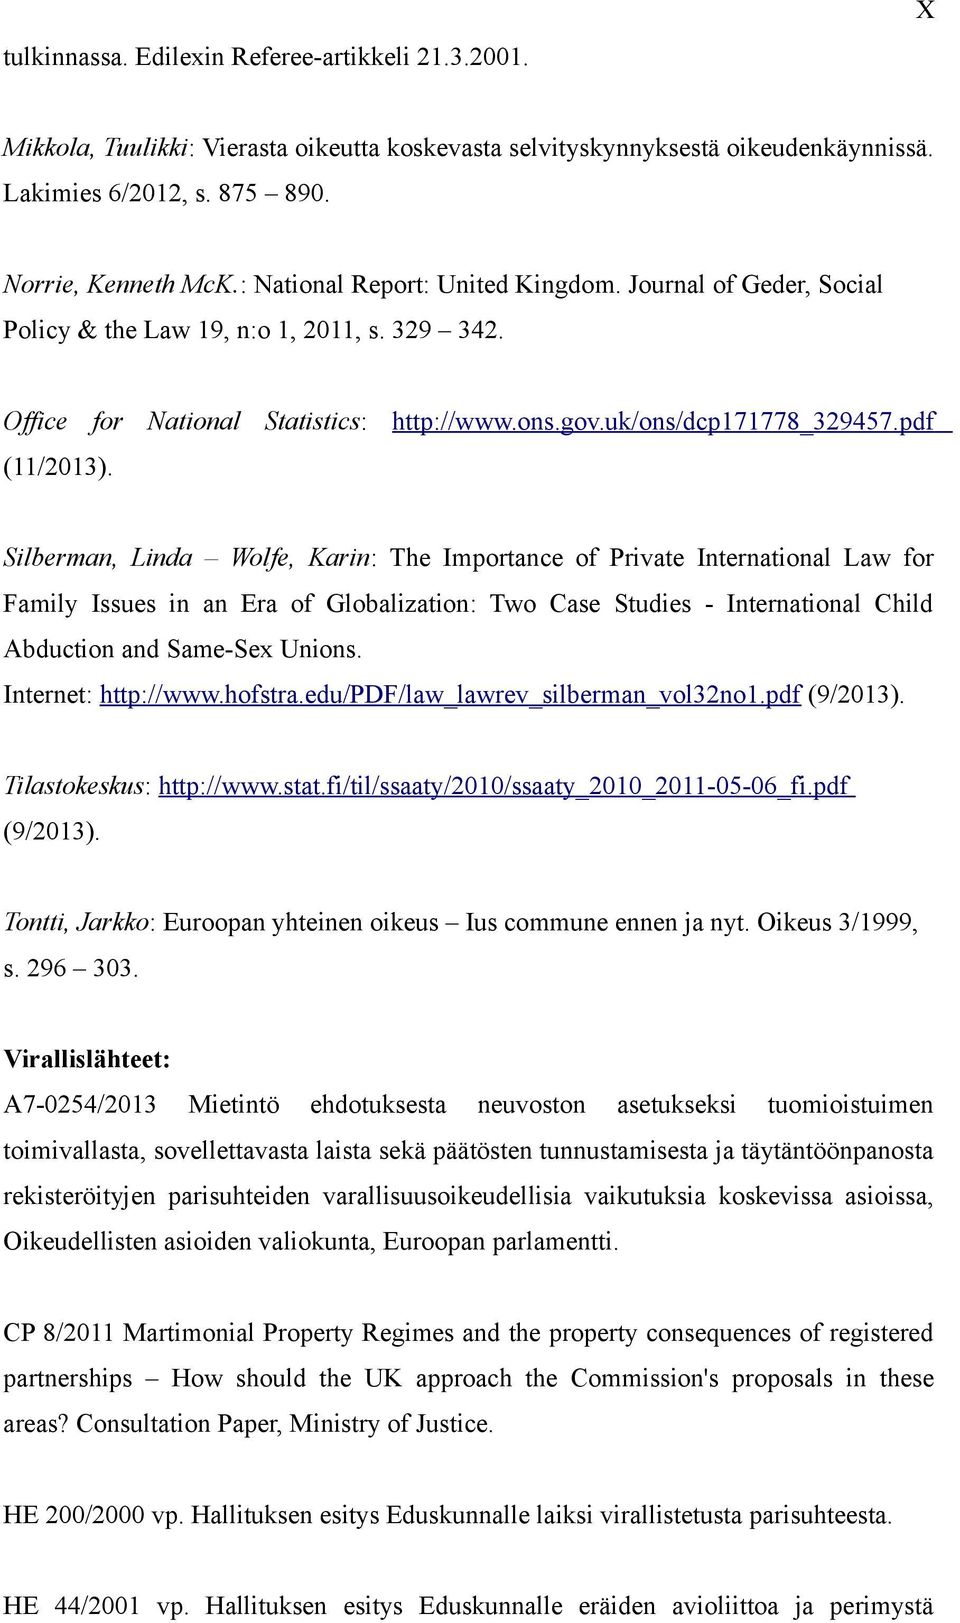 Silberman, Linda Wolfe, Karin: The Importance of Private International Law for Family Issues in an Era of Globalization: Two Case Studies - International Child Abduction and Same-Sex Unions.